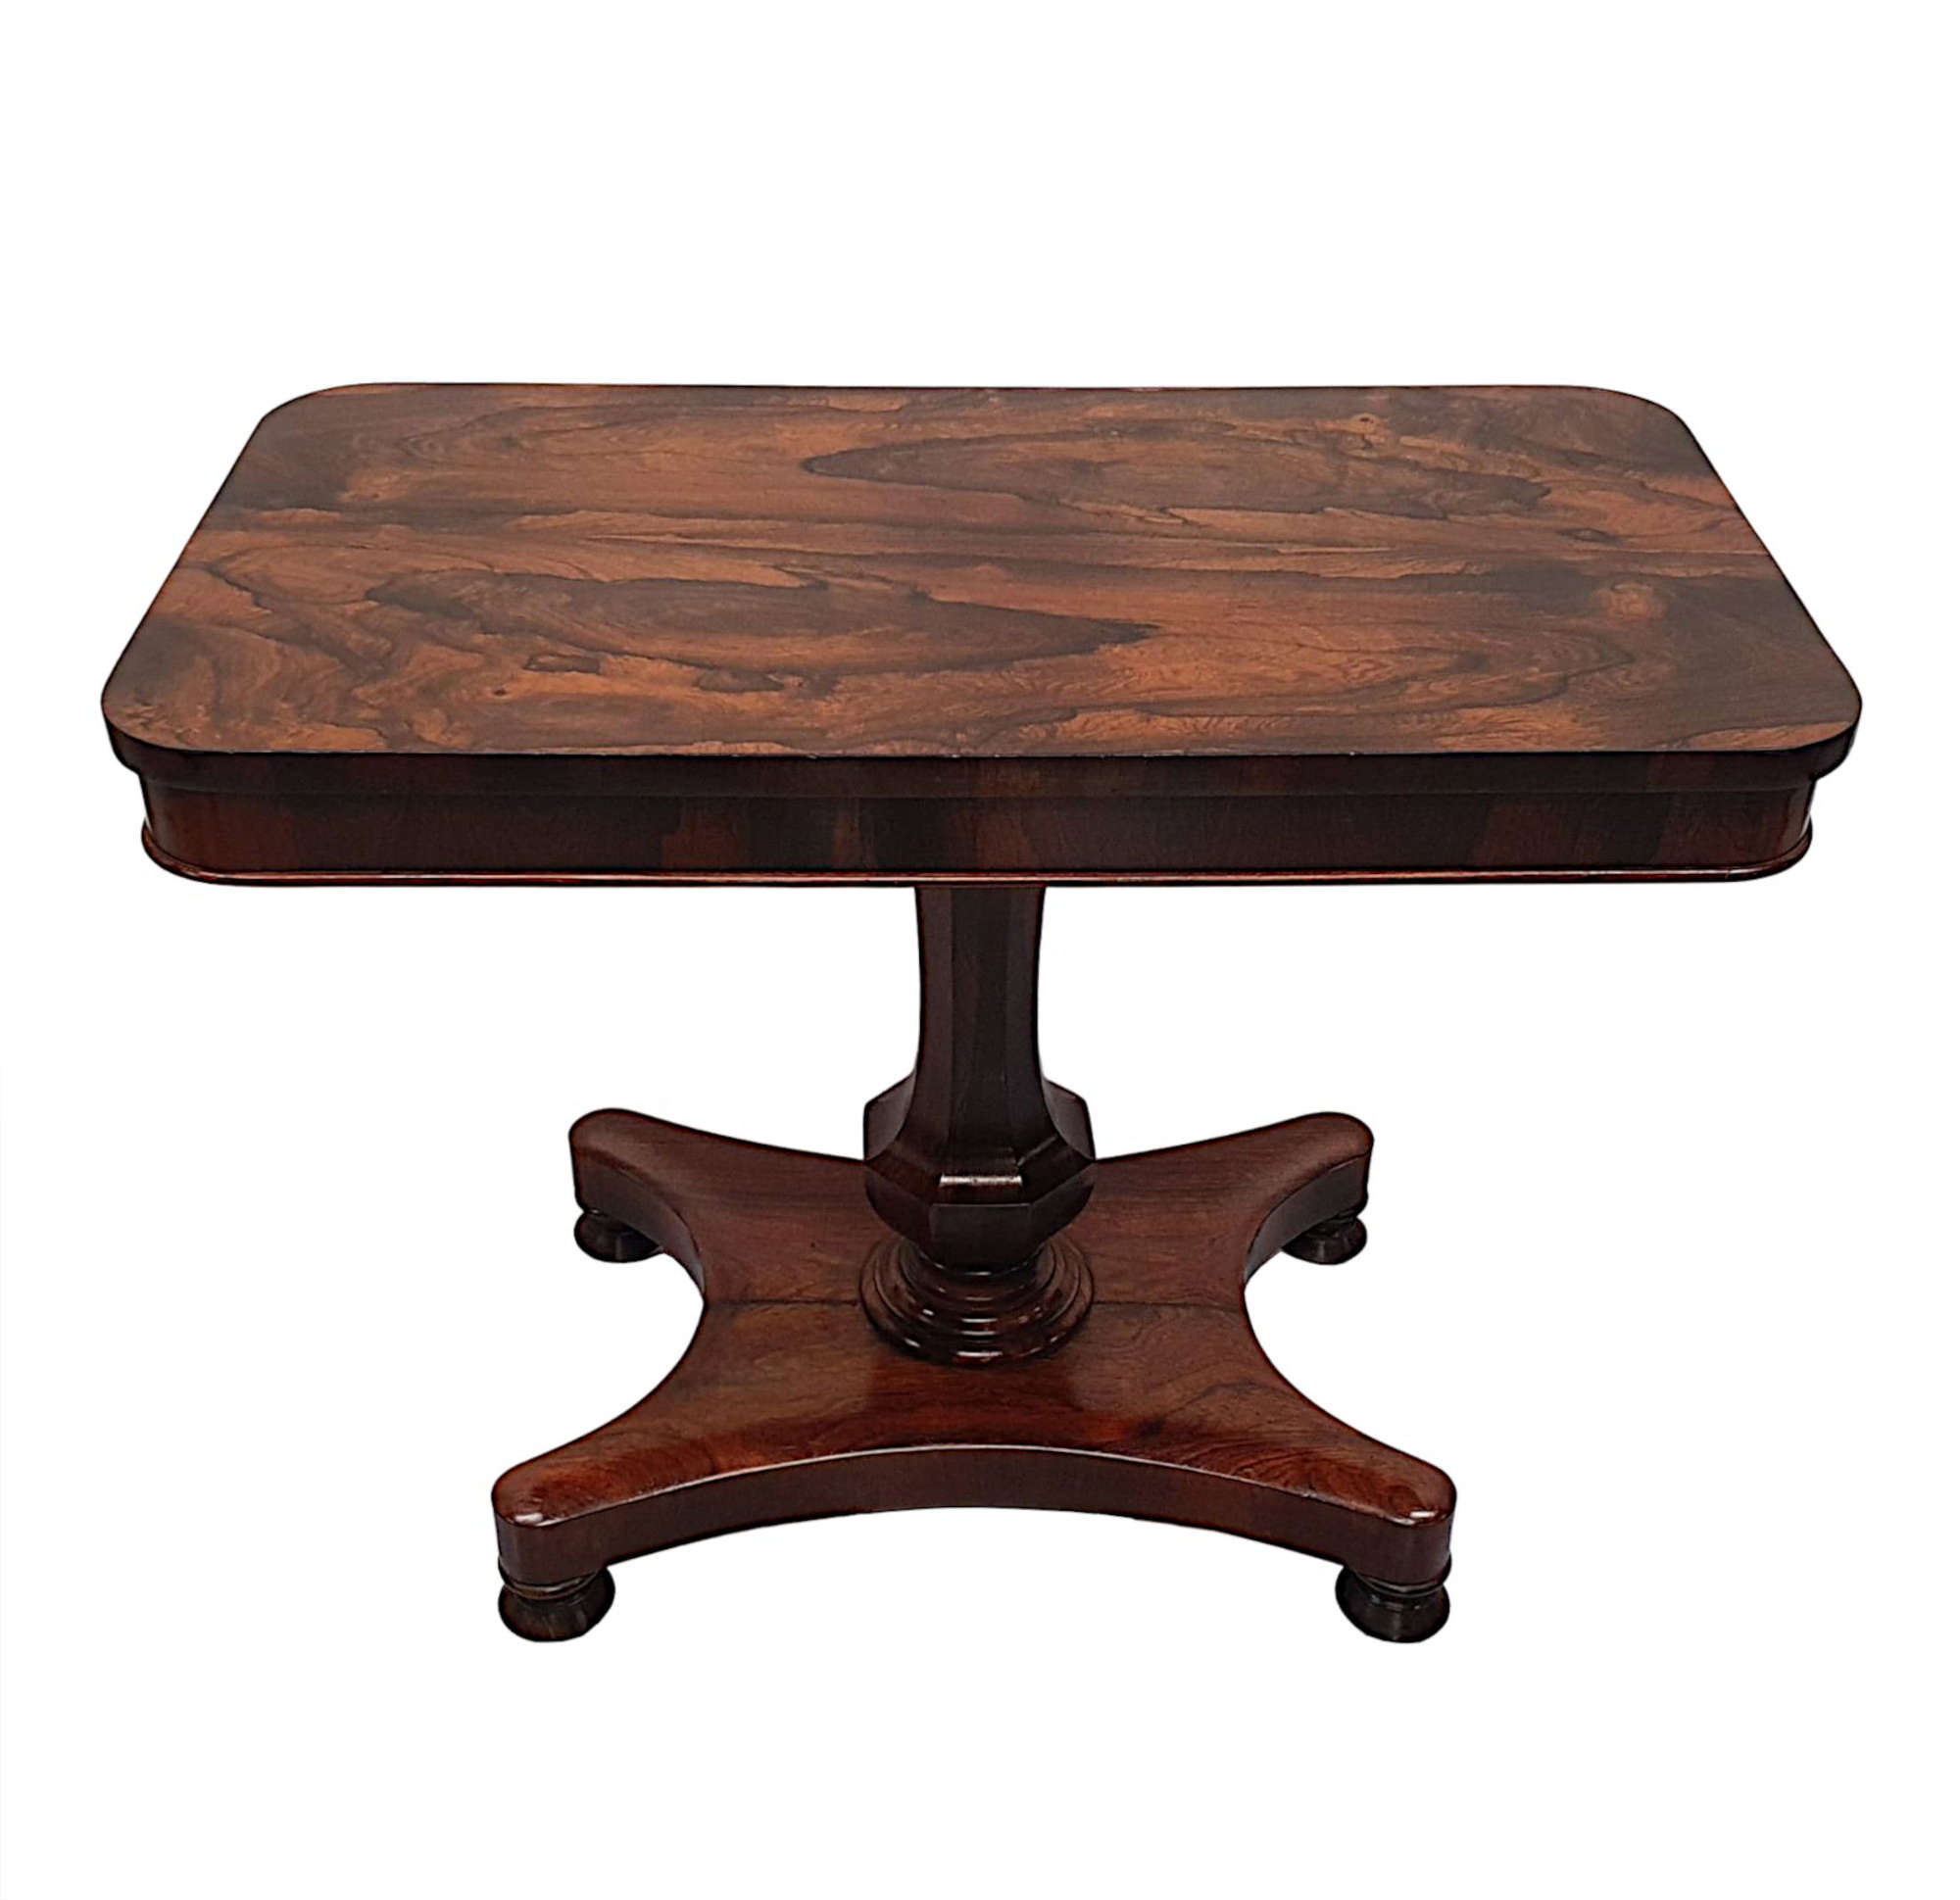 A Gorgeous Early 19th Century Fruitwood Occasional Or Centre Table